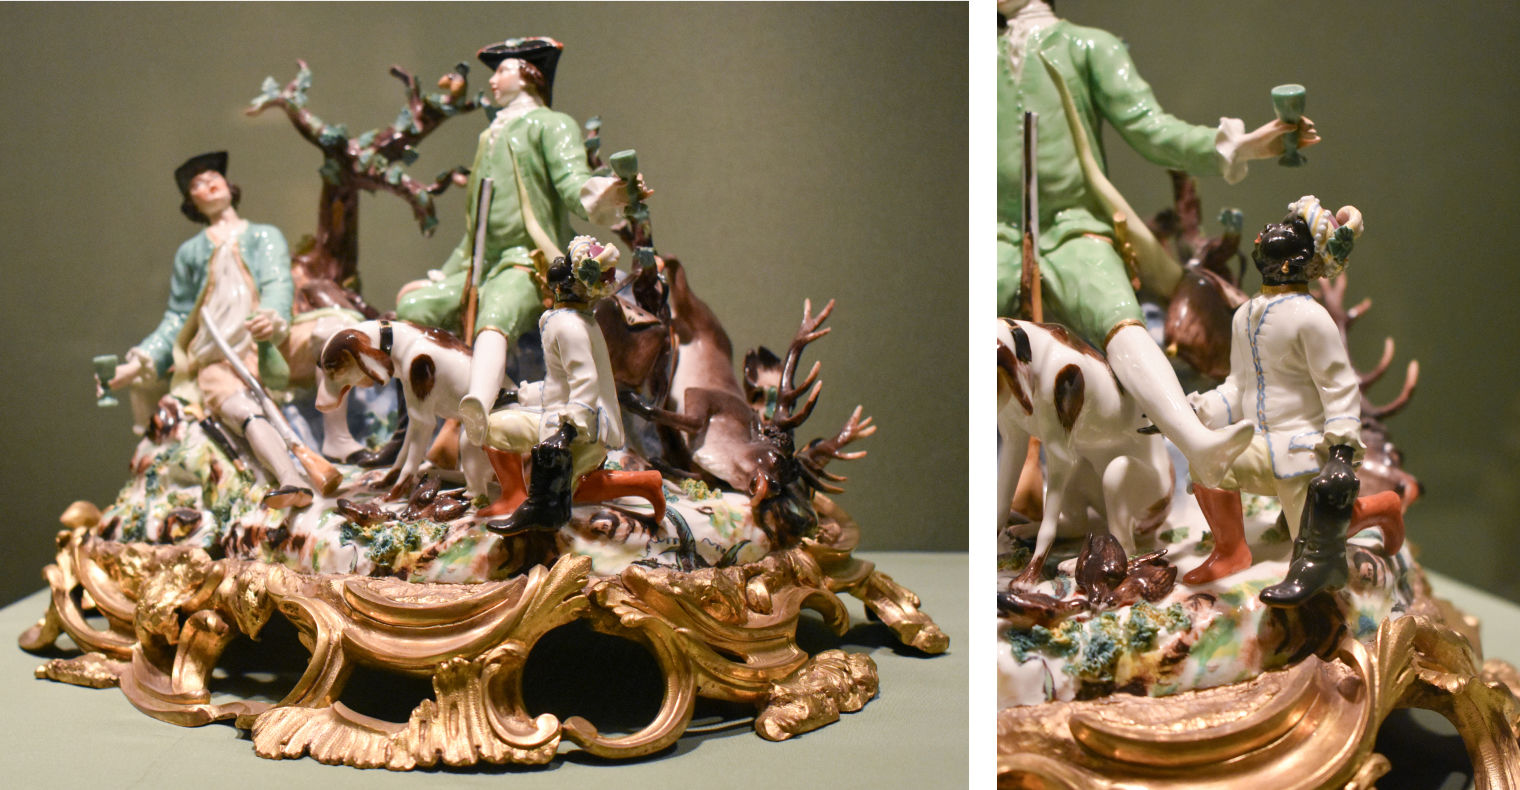 Porcelain figure showing two white hunters drinking, a dog, and a black person depicted at a smaller scale, kneeling next to them